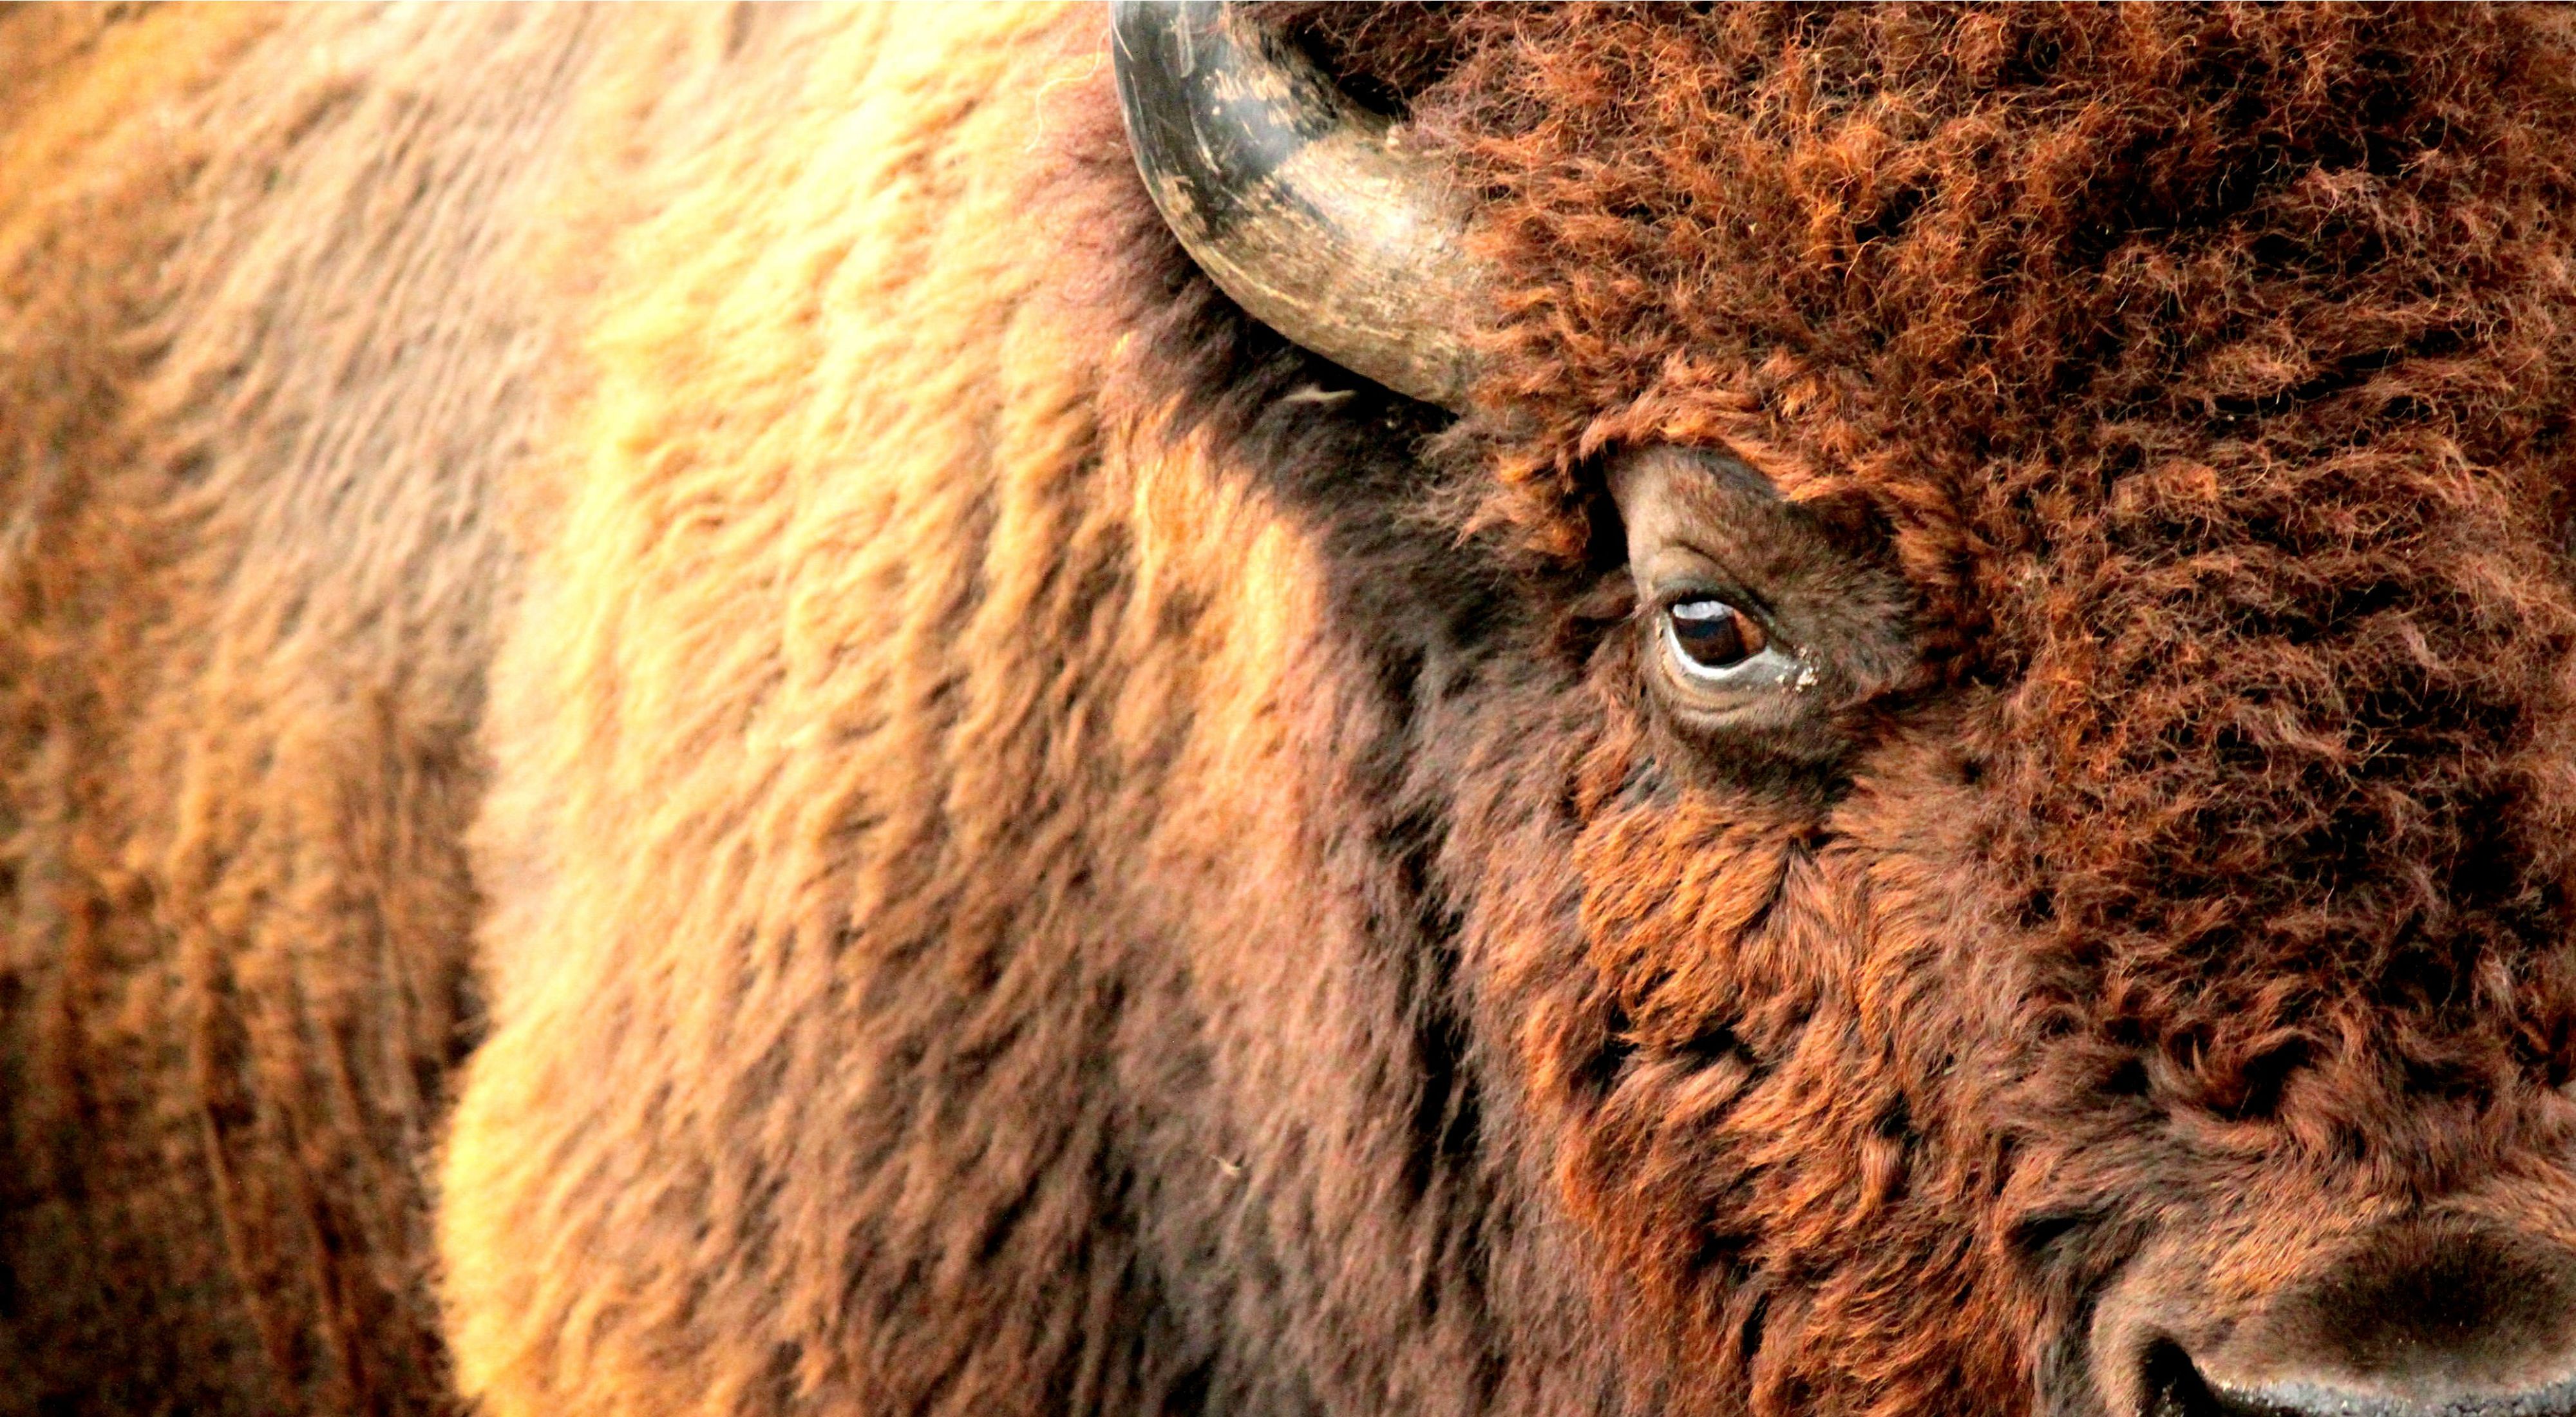 Close up of a bison's face.